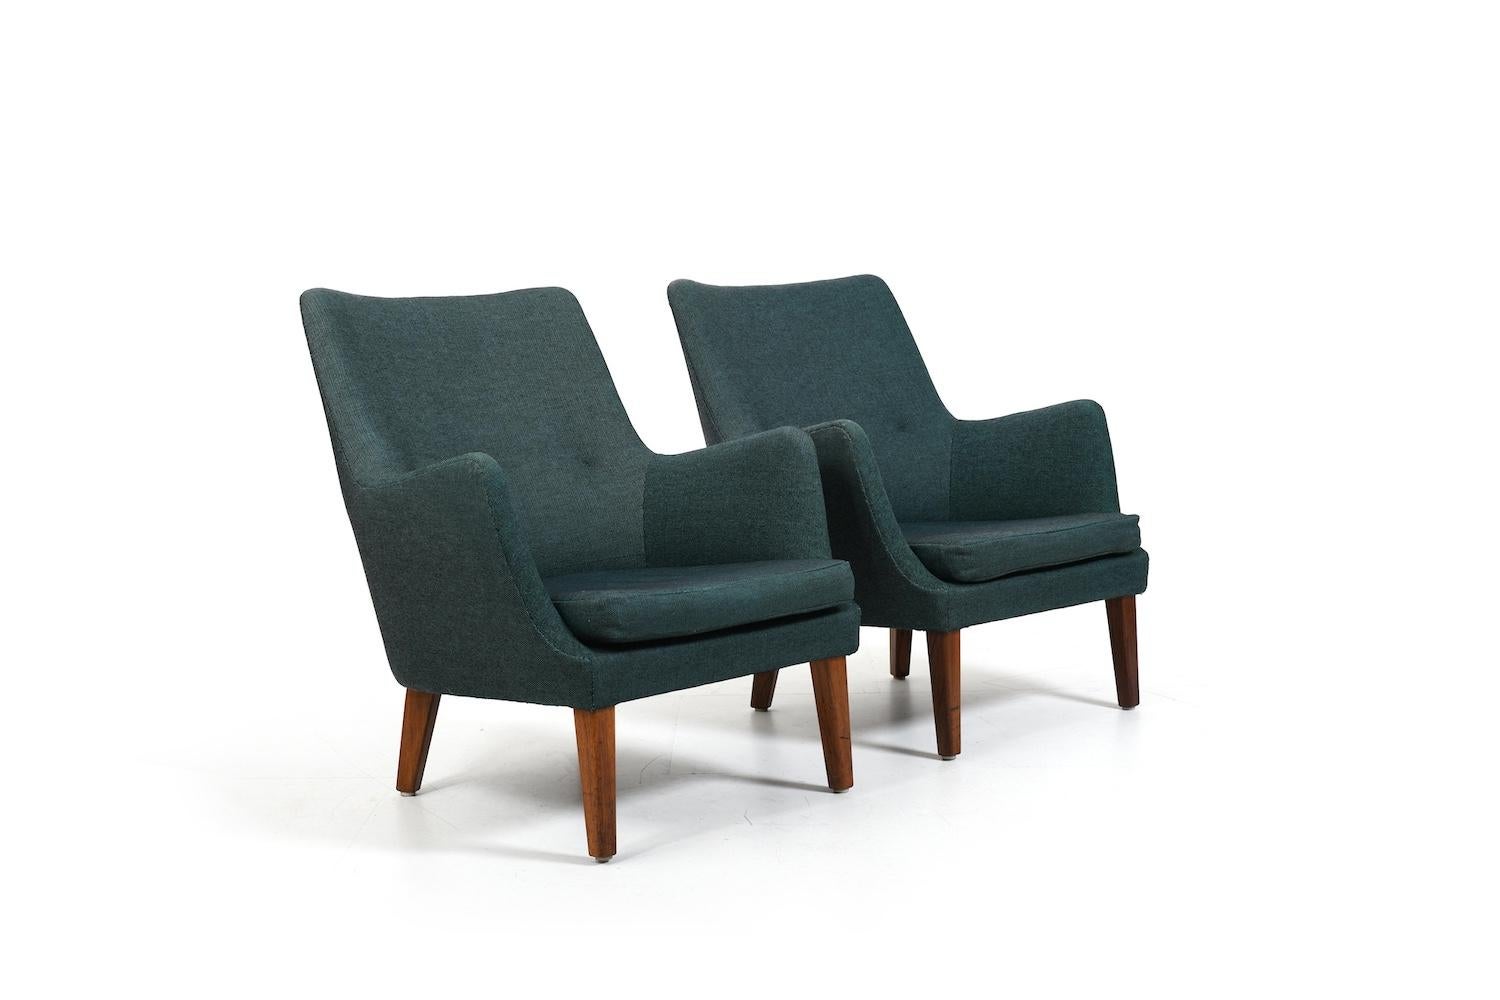 Pair of model AV-53 by Arne Vodder for Ivan Schlechter Copenhagen. Designed in 1953. With legs in beautiful wood. Produced 1950s. All in original condition, with the Ivan Schlechter marks underneath. (see photos) 